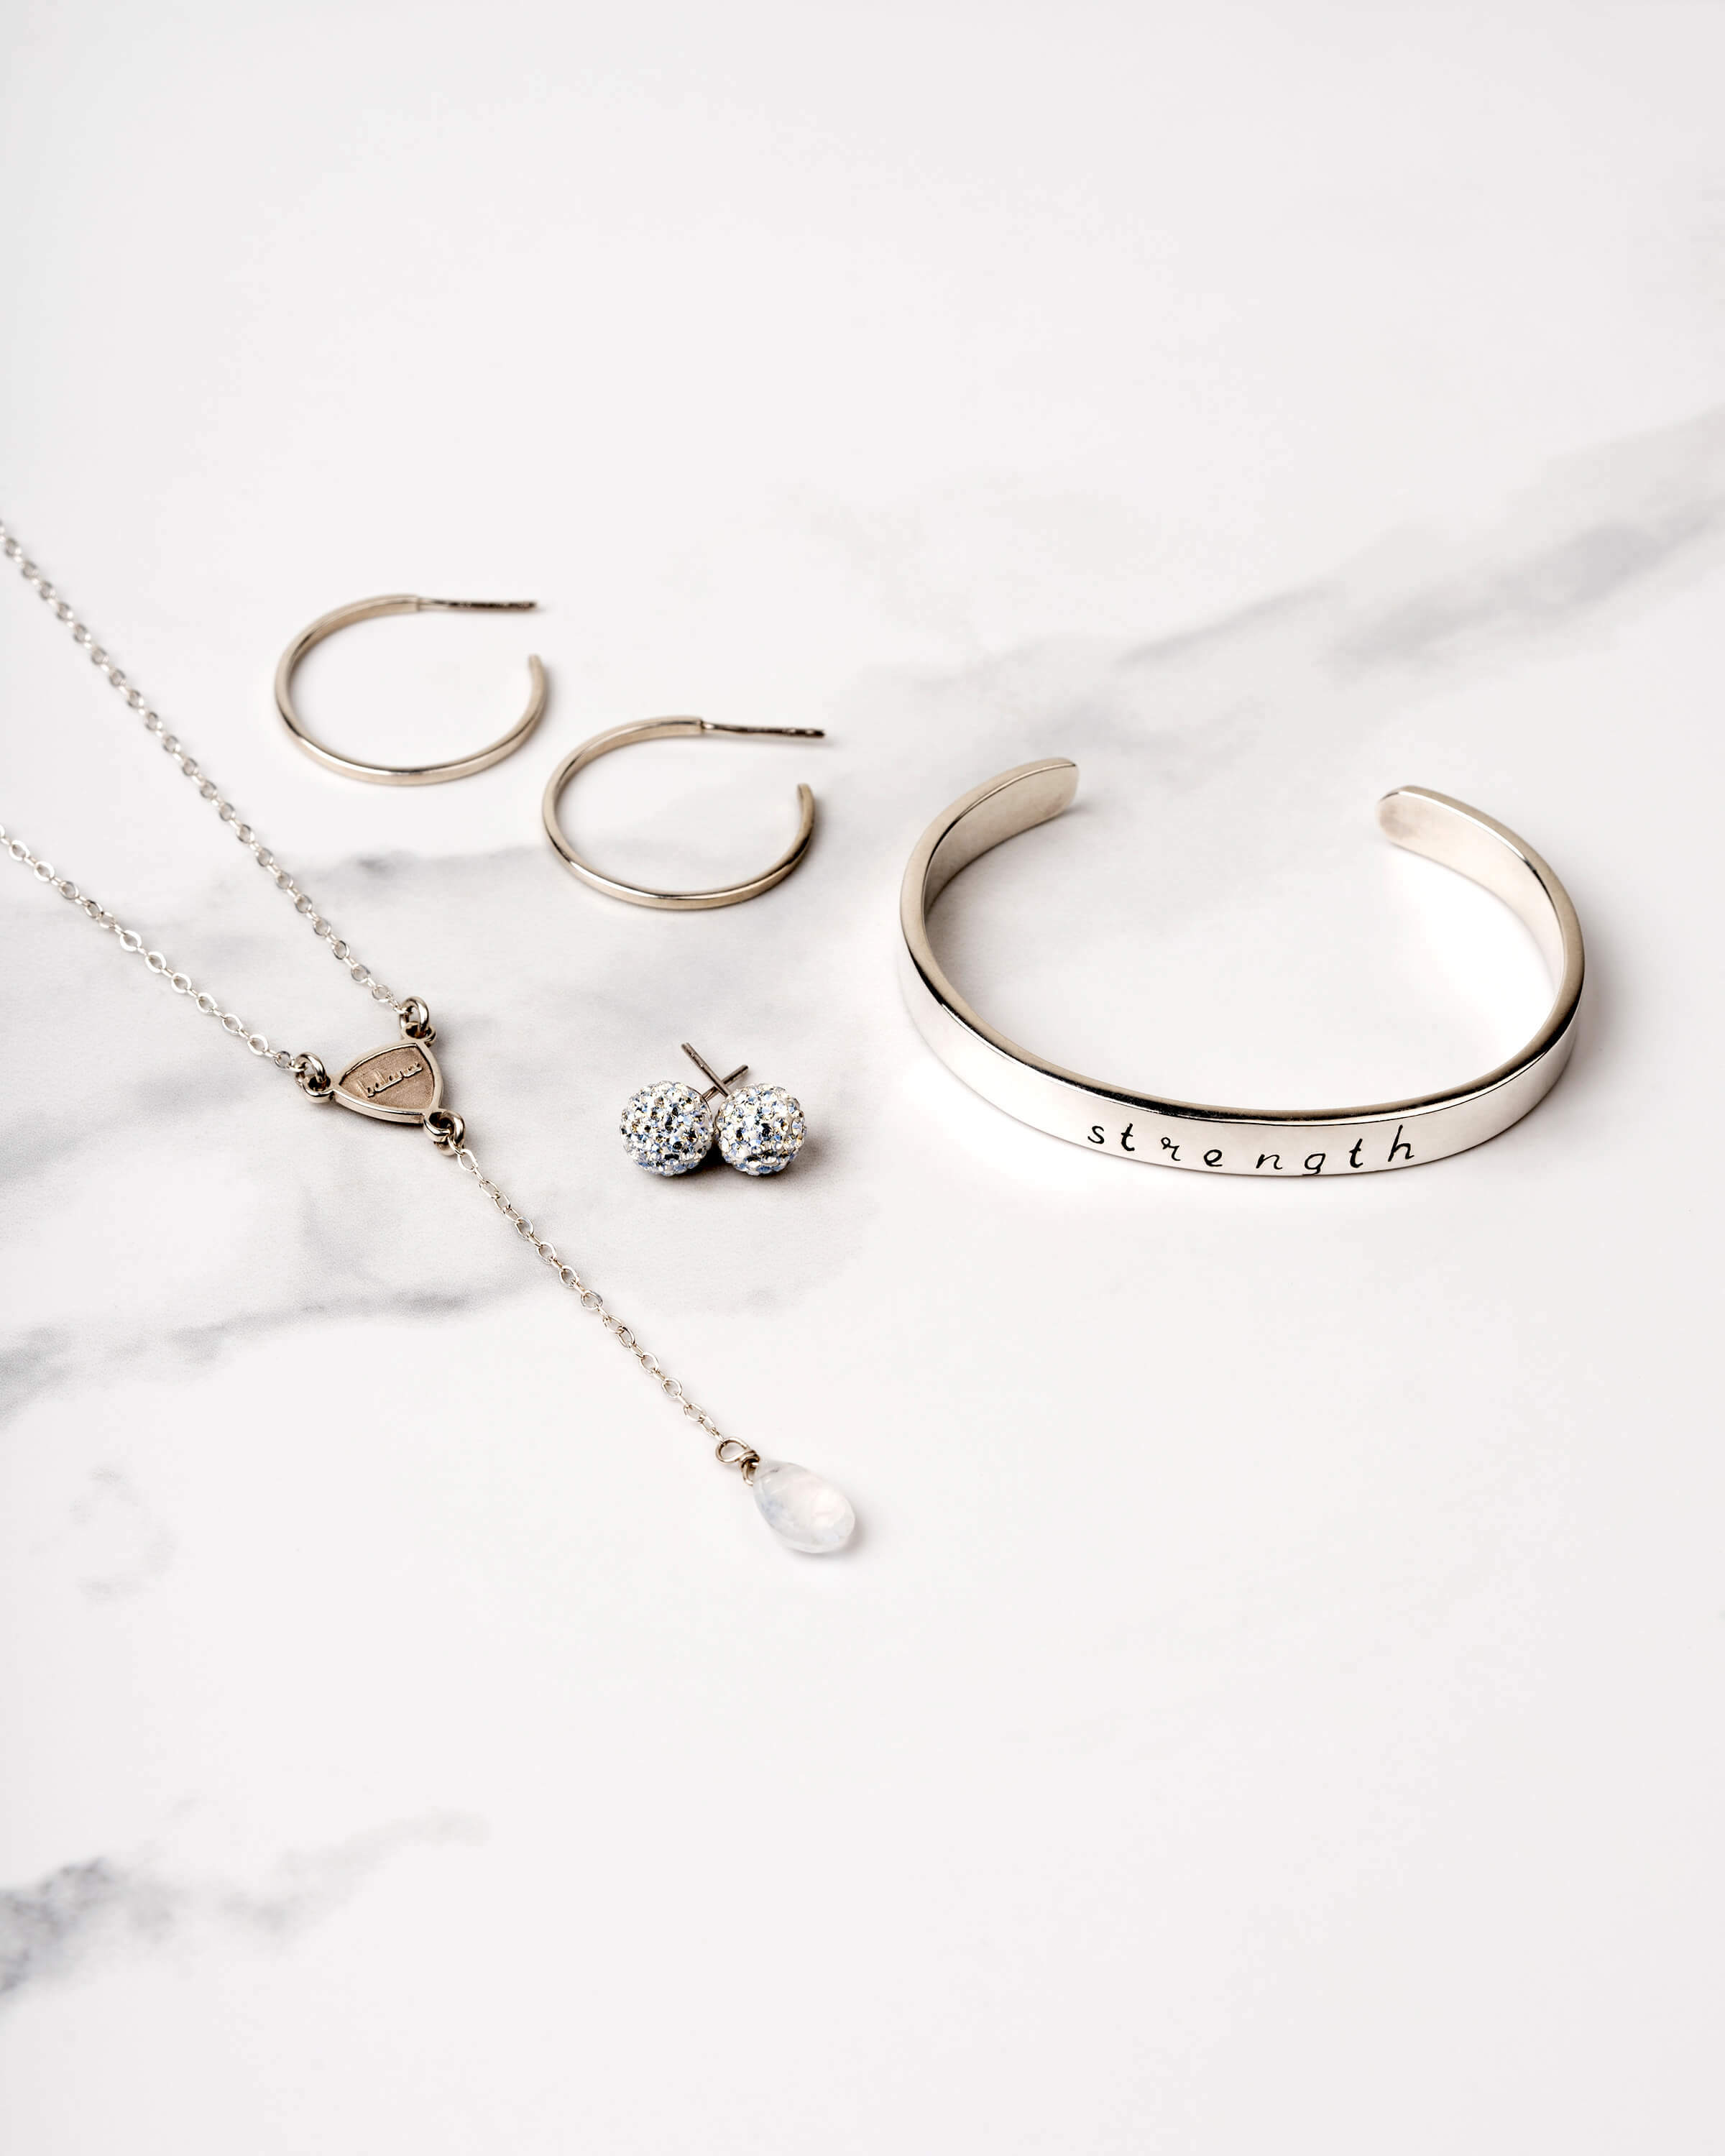 online contests, sweepstakes and giveaways - Enter for a chance to WIN a Tessa Virtue Collection Jewerly Set!